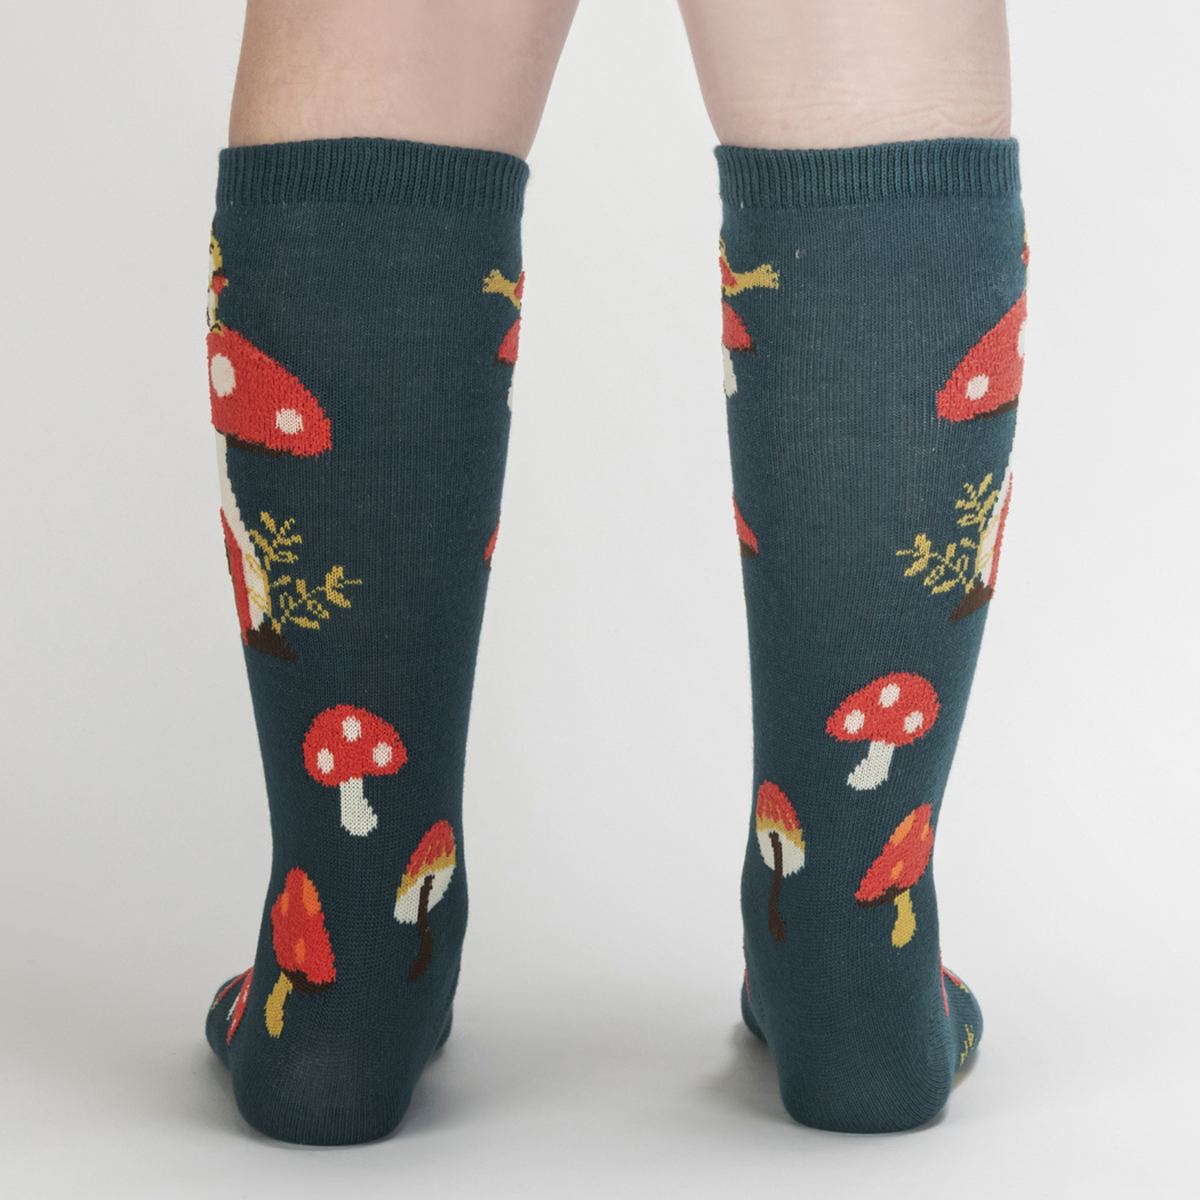 Kids&#39; Sock It To Me Shroom and Board women&#39;s and kids&#39; sock featuring green knee high with deer, squirrel, and mushrooms all over worn by model seen from behind